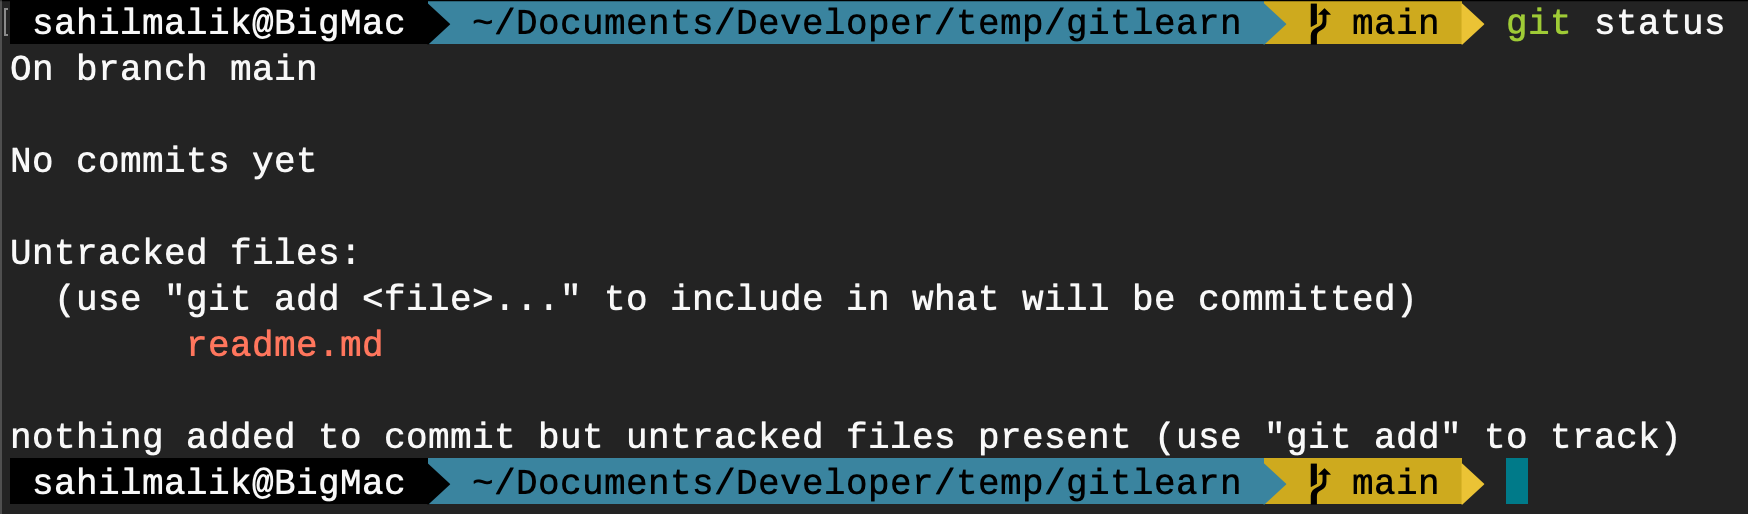 Figure 4: Git status tells me that I have an untracked file.